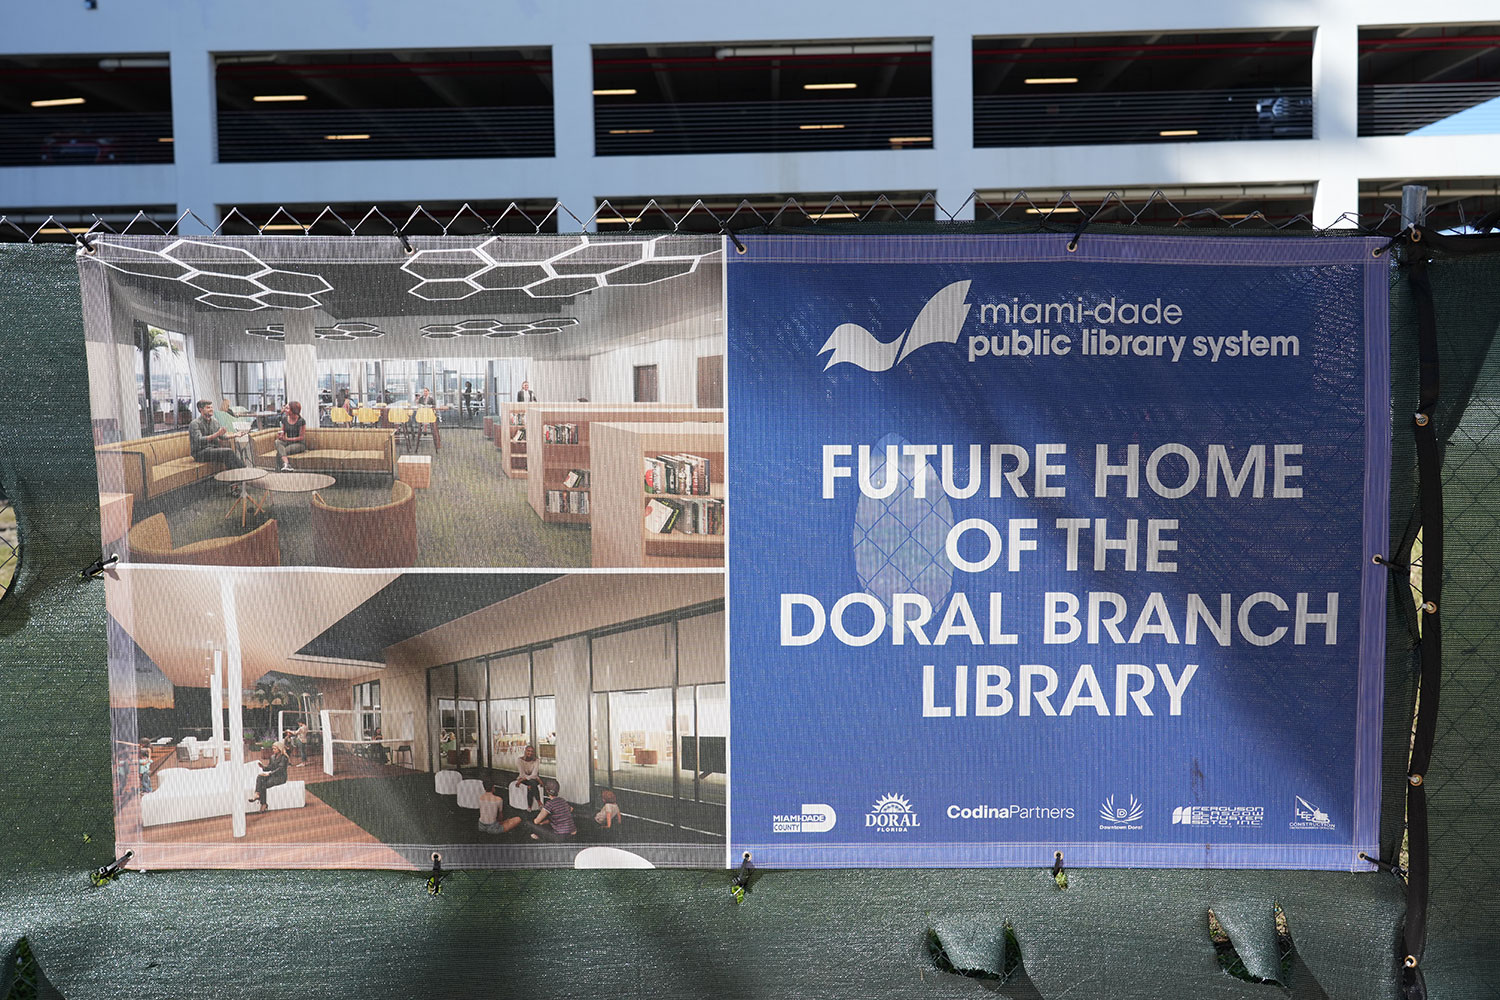 Construction for Doral Branch Library